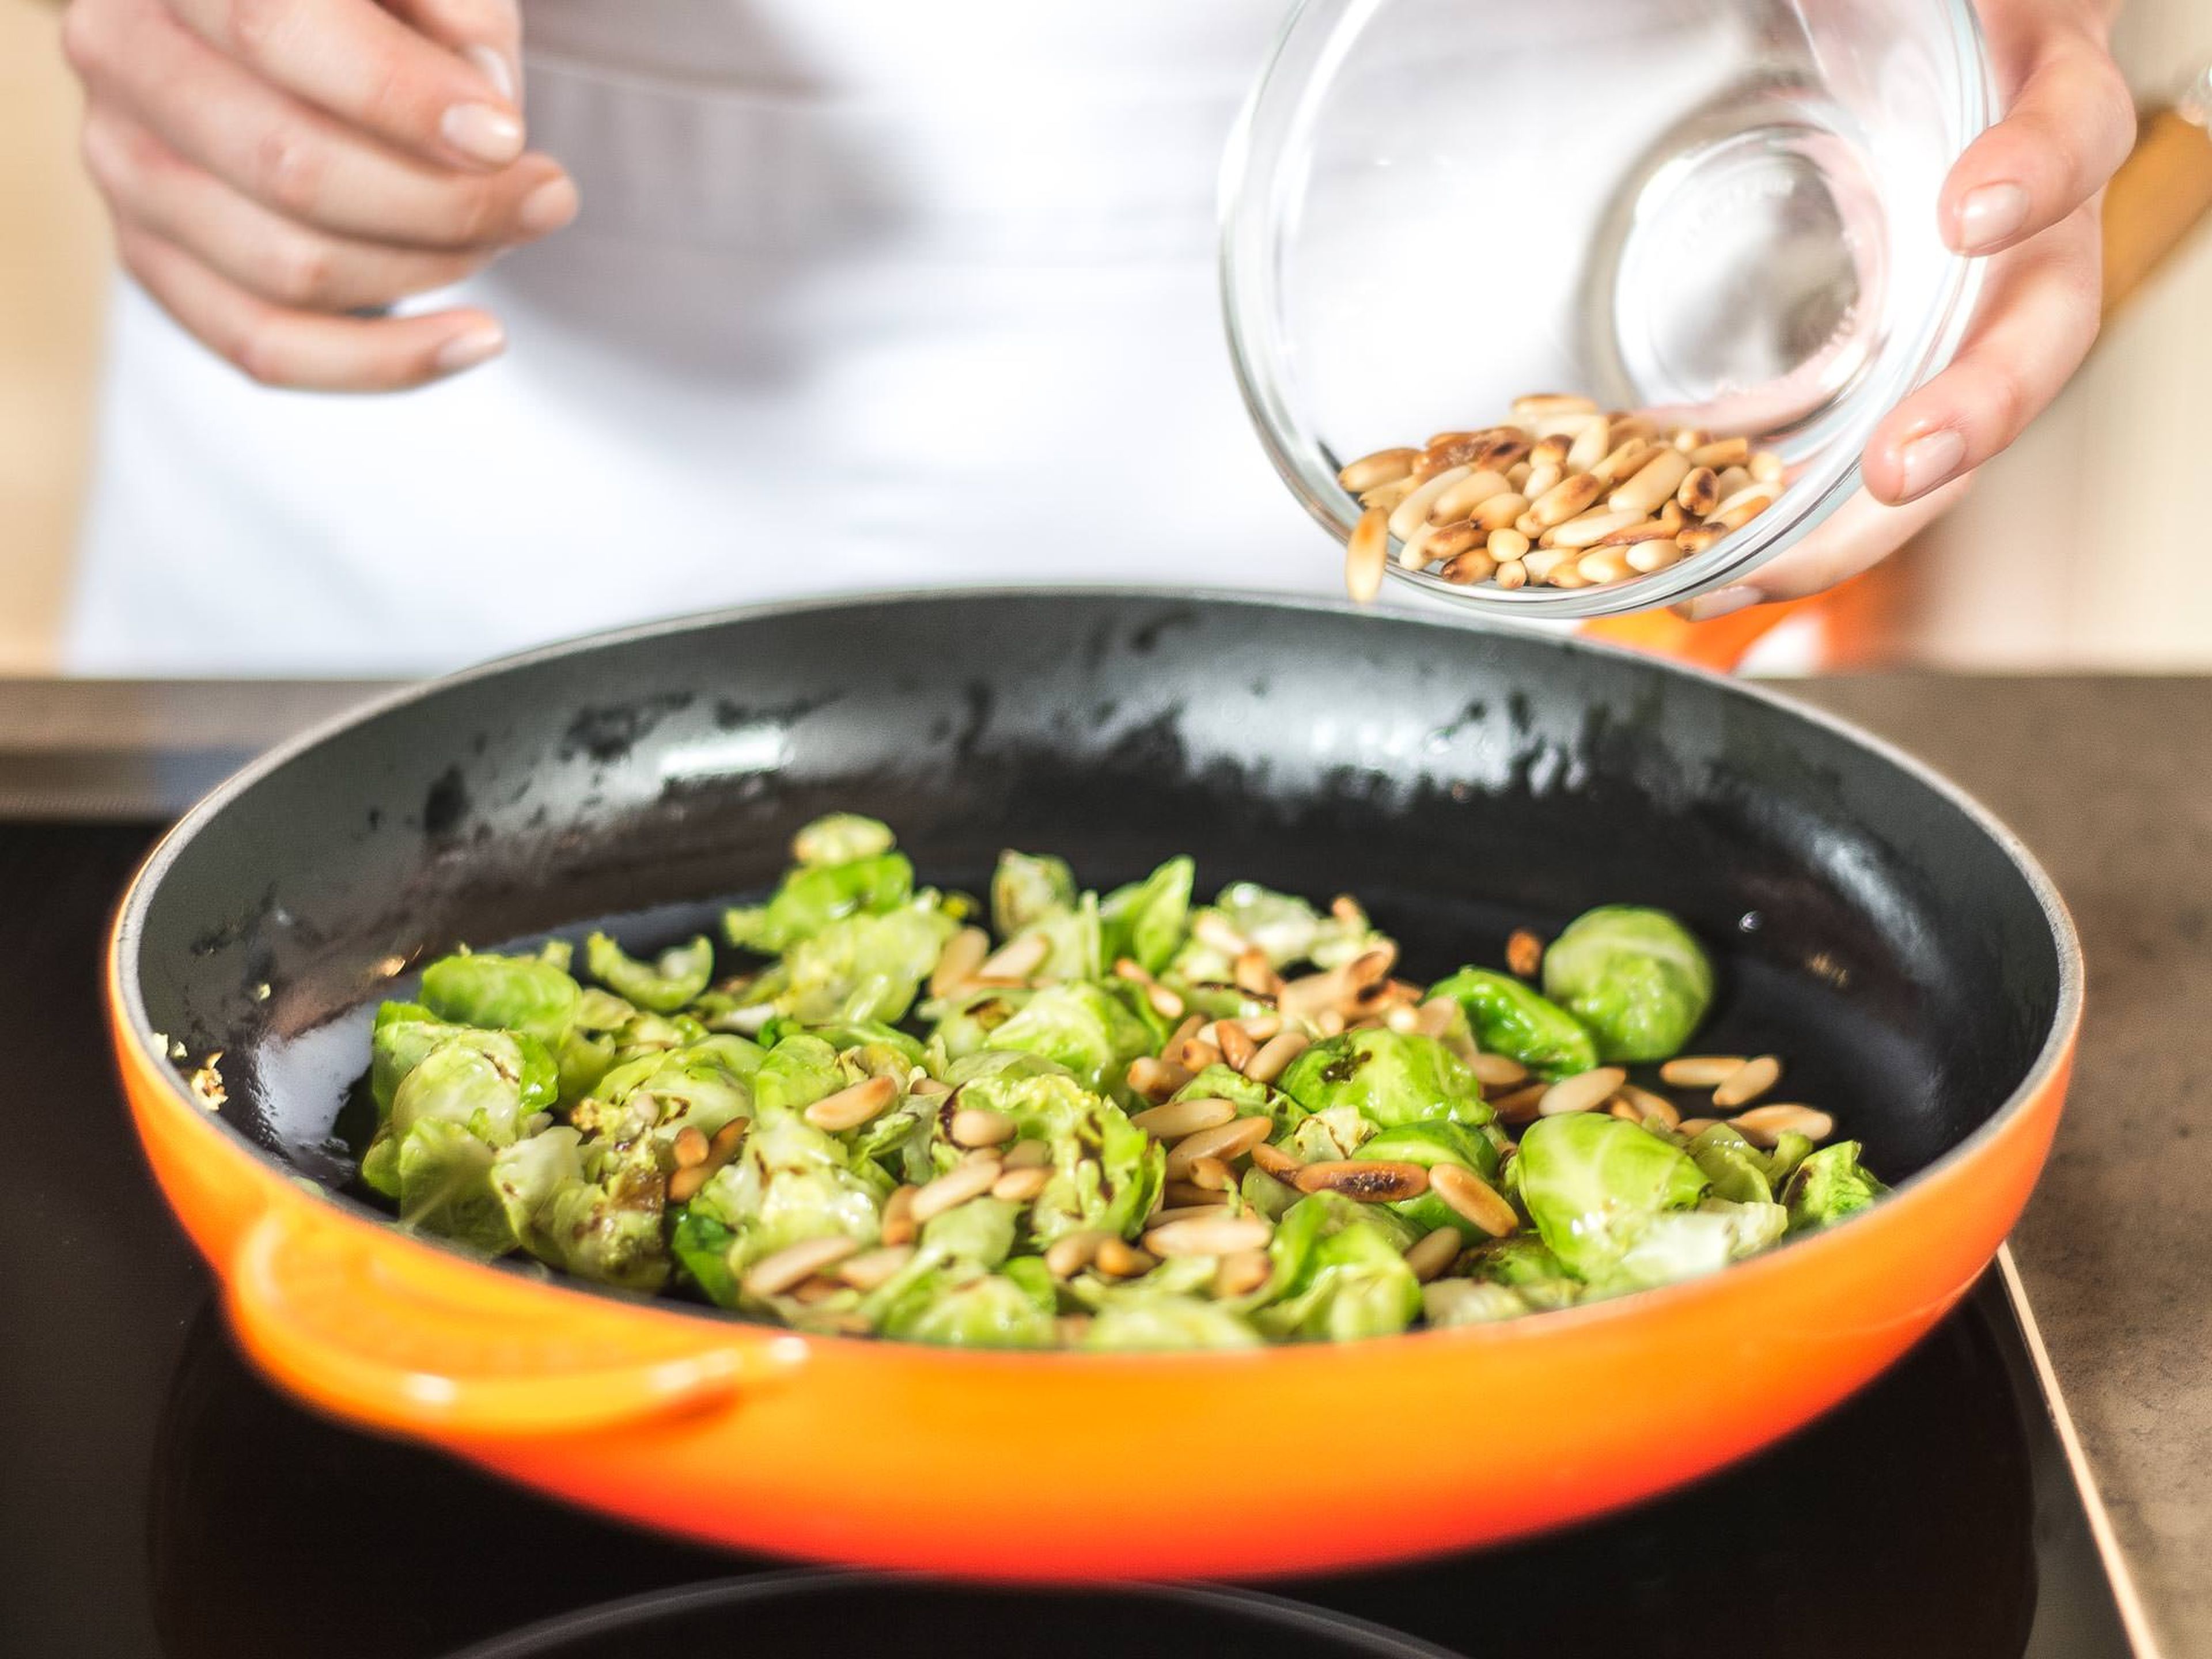 As soon as Brussels sprout leaves have slightly softened (after approx. 2 - 3 min.) add the pine nuts and roast for an additional 1 – 2 min.